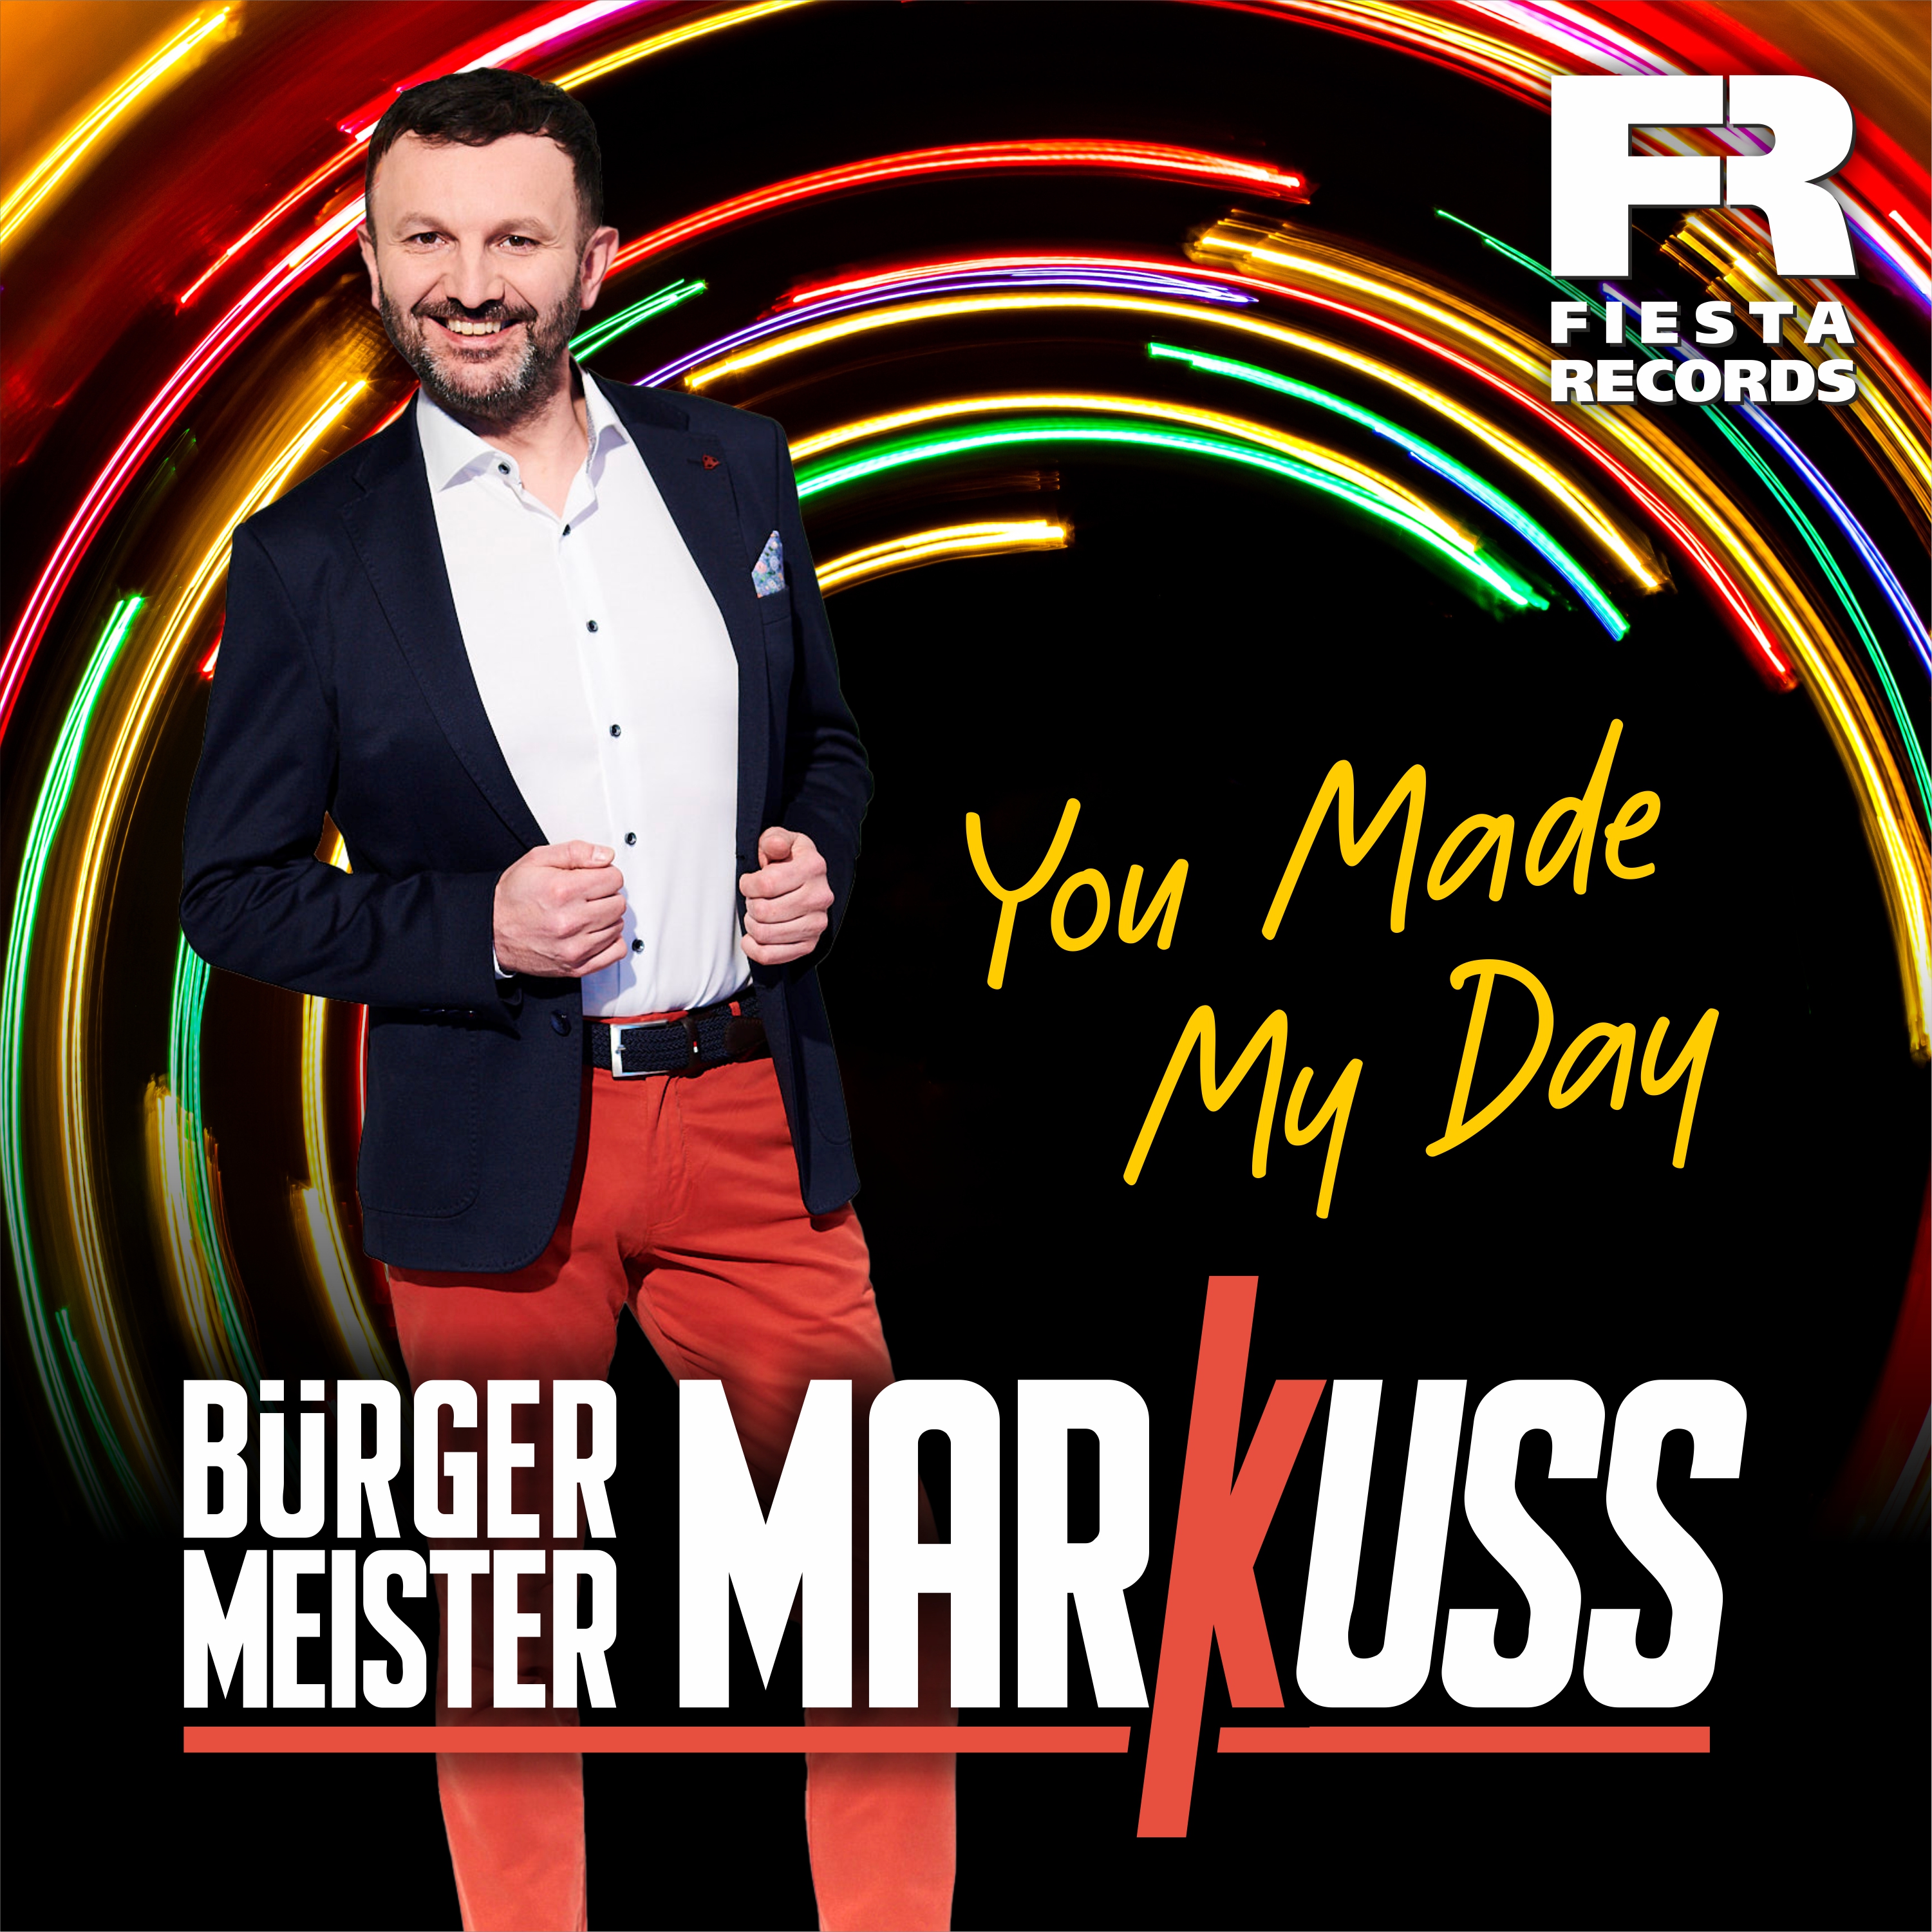 Bürgemeister MarKuss * You Made My Day (Download-Track)